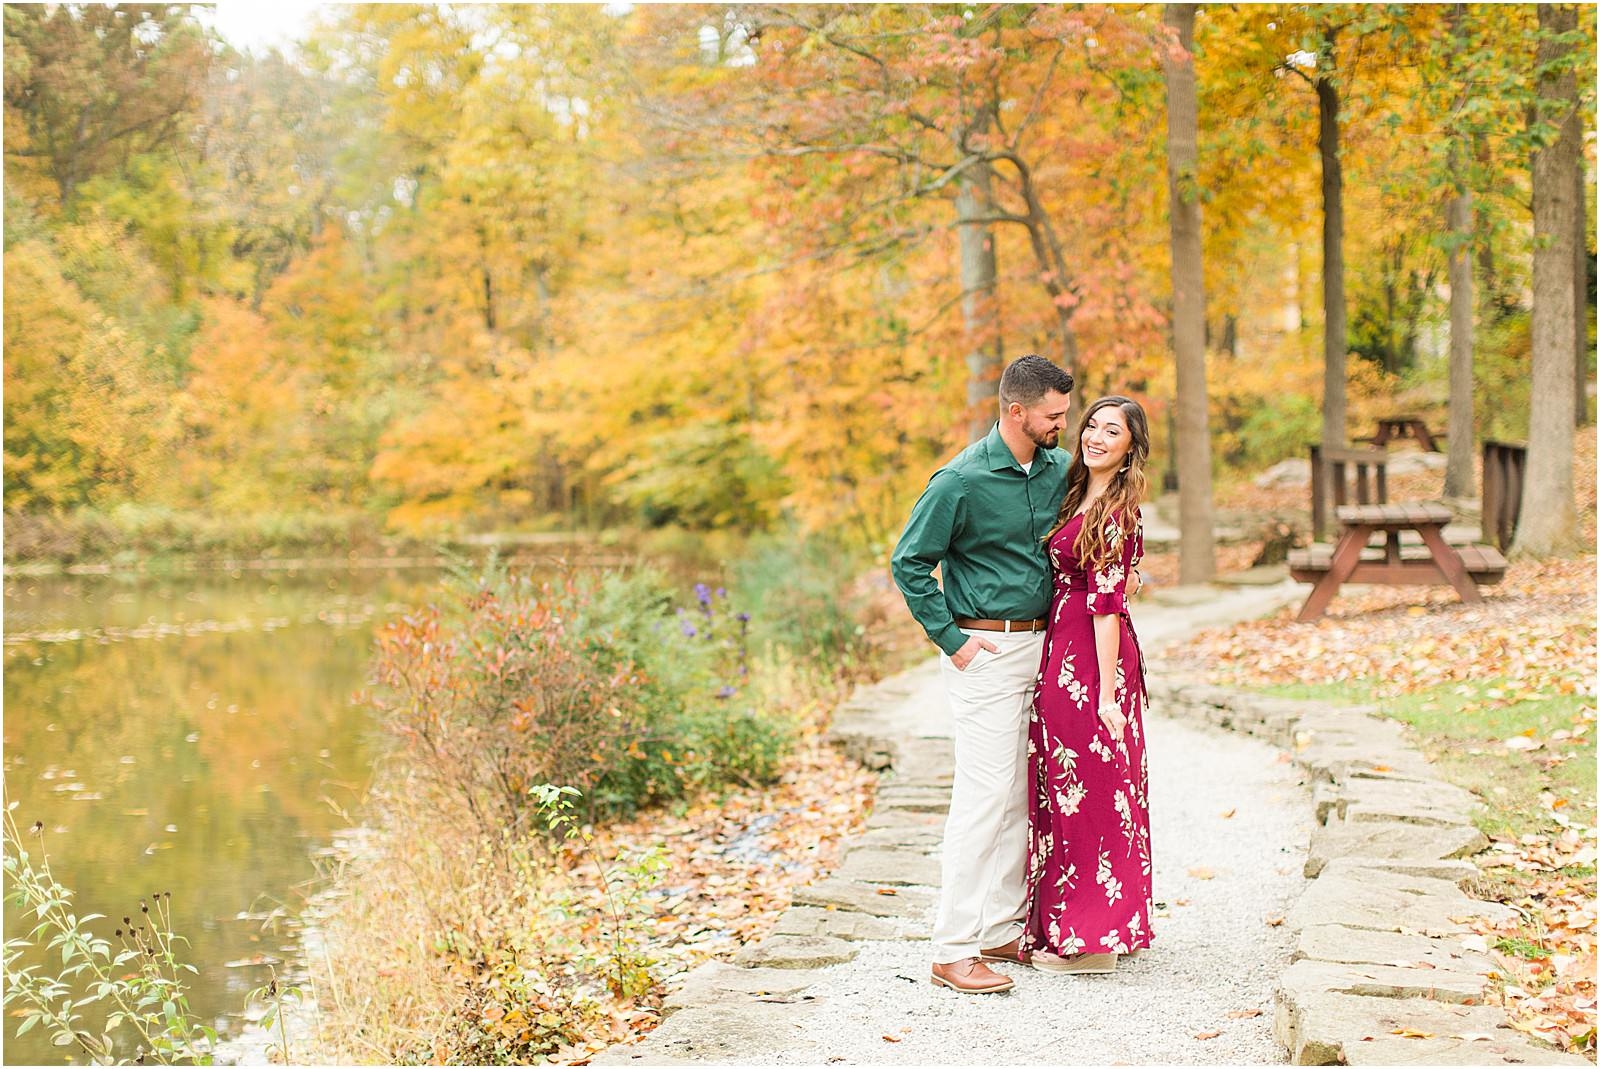 A Fall Oliver Winery Engagement Session | Sally and Andrew | Bret and Brandie Photography 0012.jpg